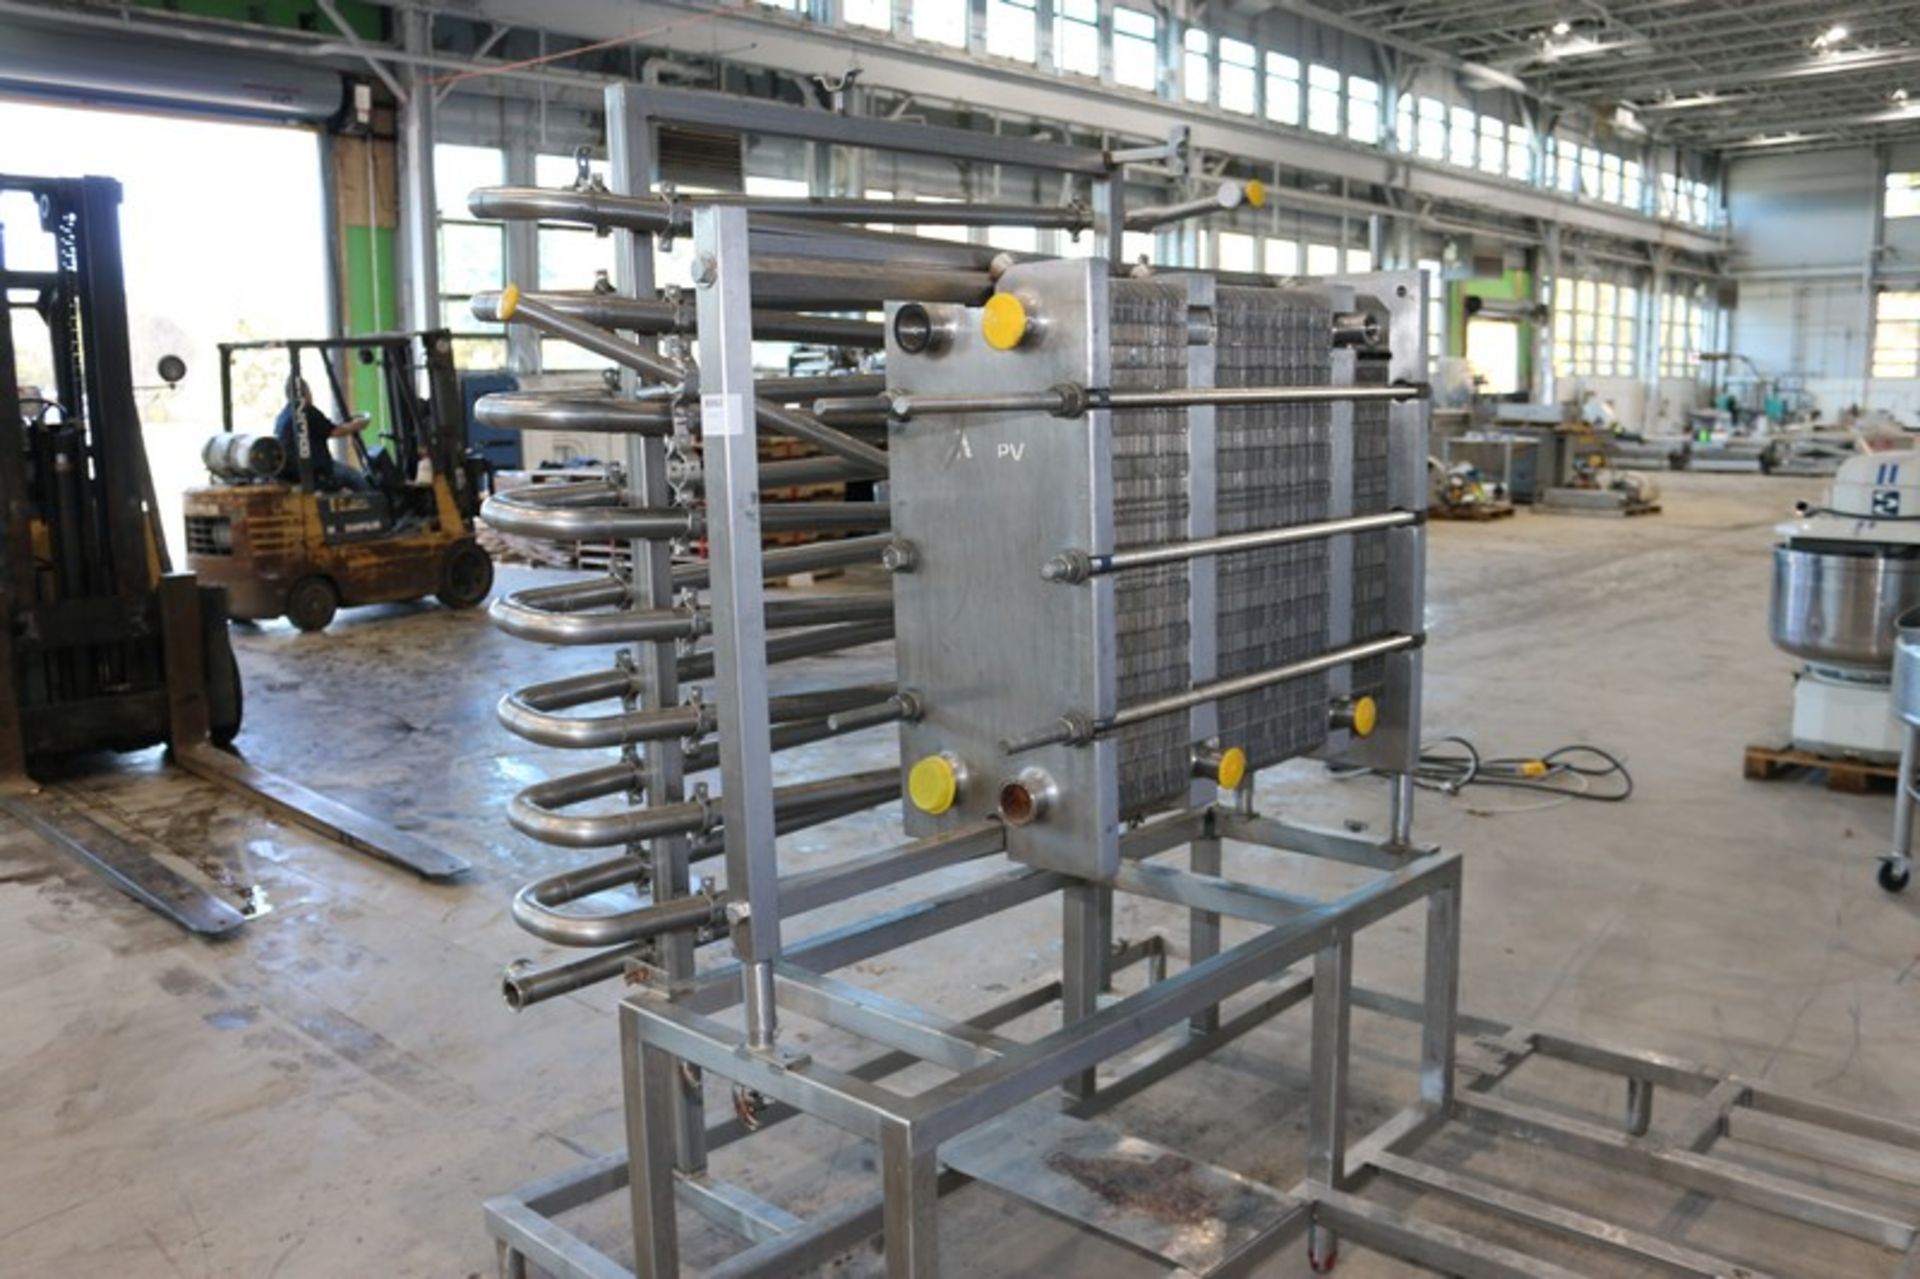 S/S Pasteurization Skid, Includes APV 3-Section Plate Heat Exchanger, M/N SP250-S, S/N 20332, with - Image 9 of 10